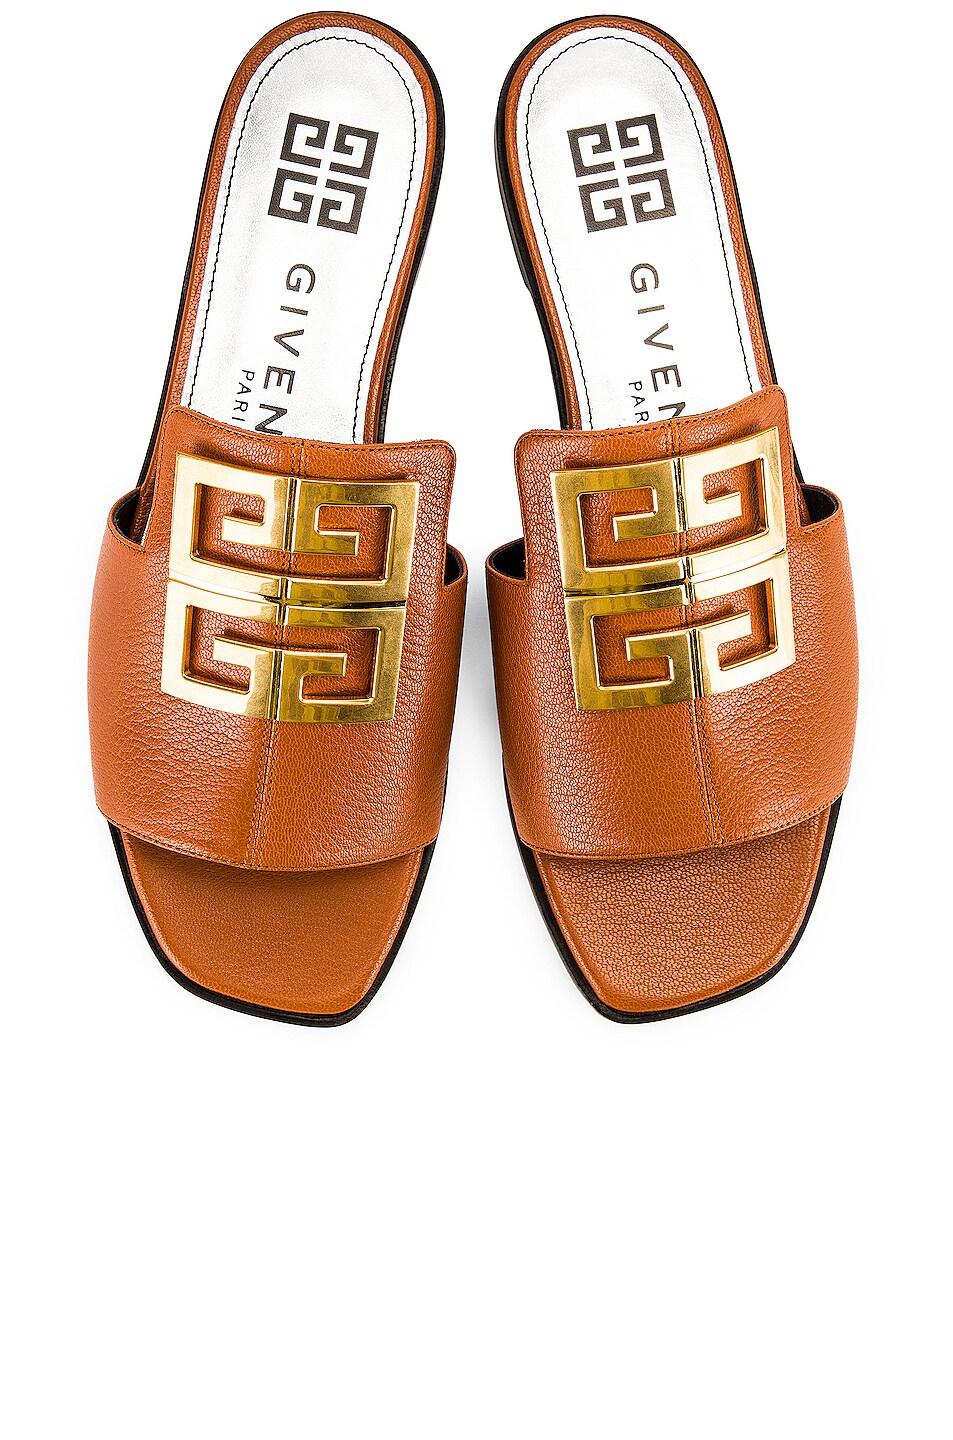 Givenchy 4G Flat Mule Sandals in Blond | FWRD